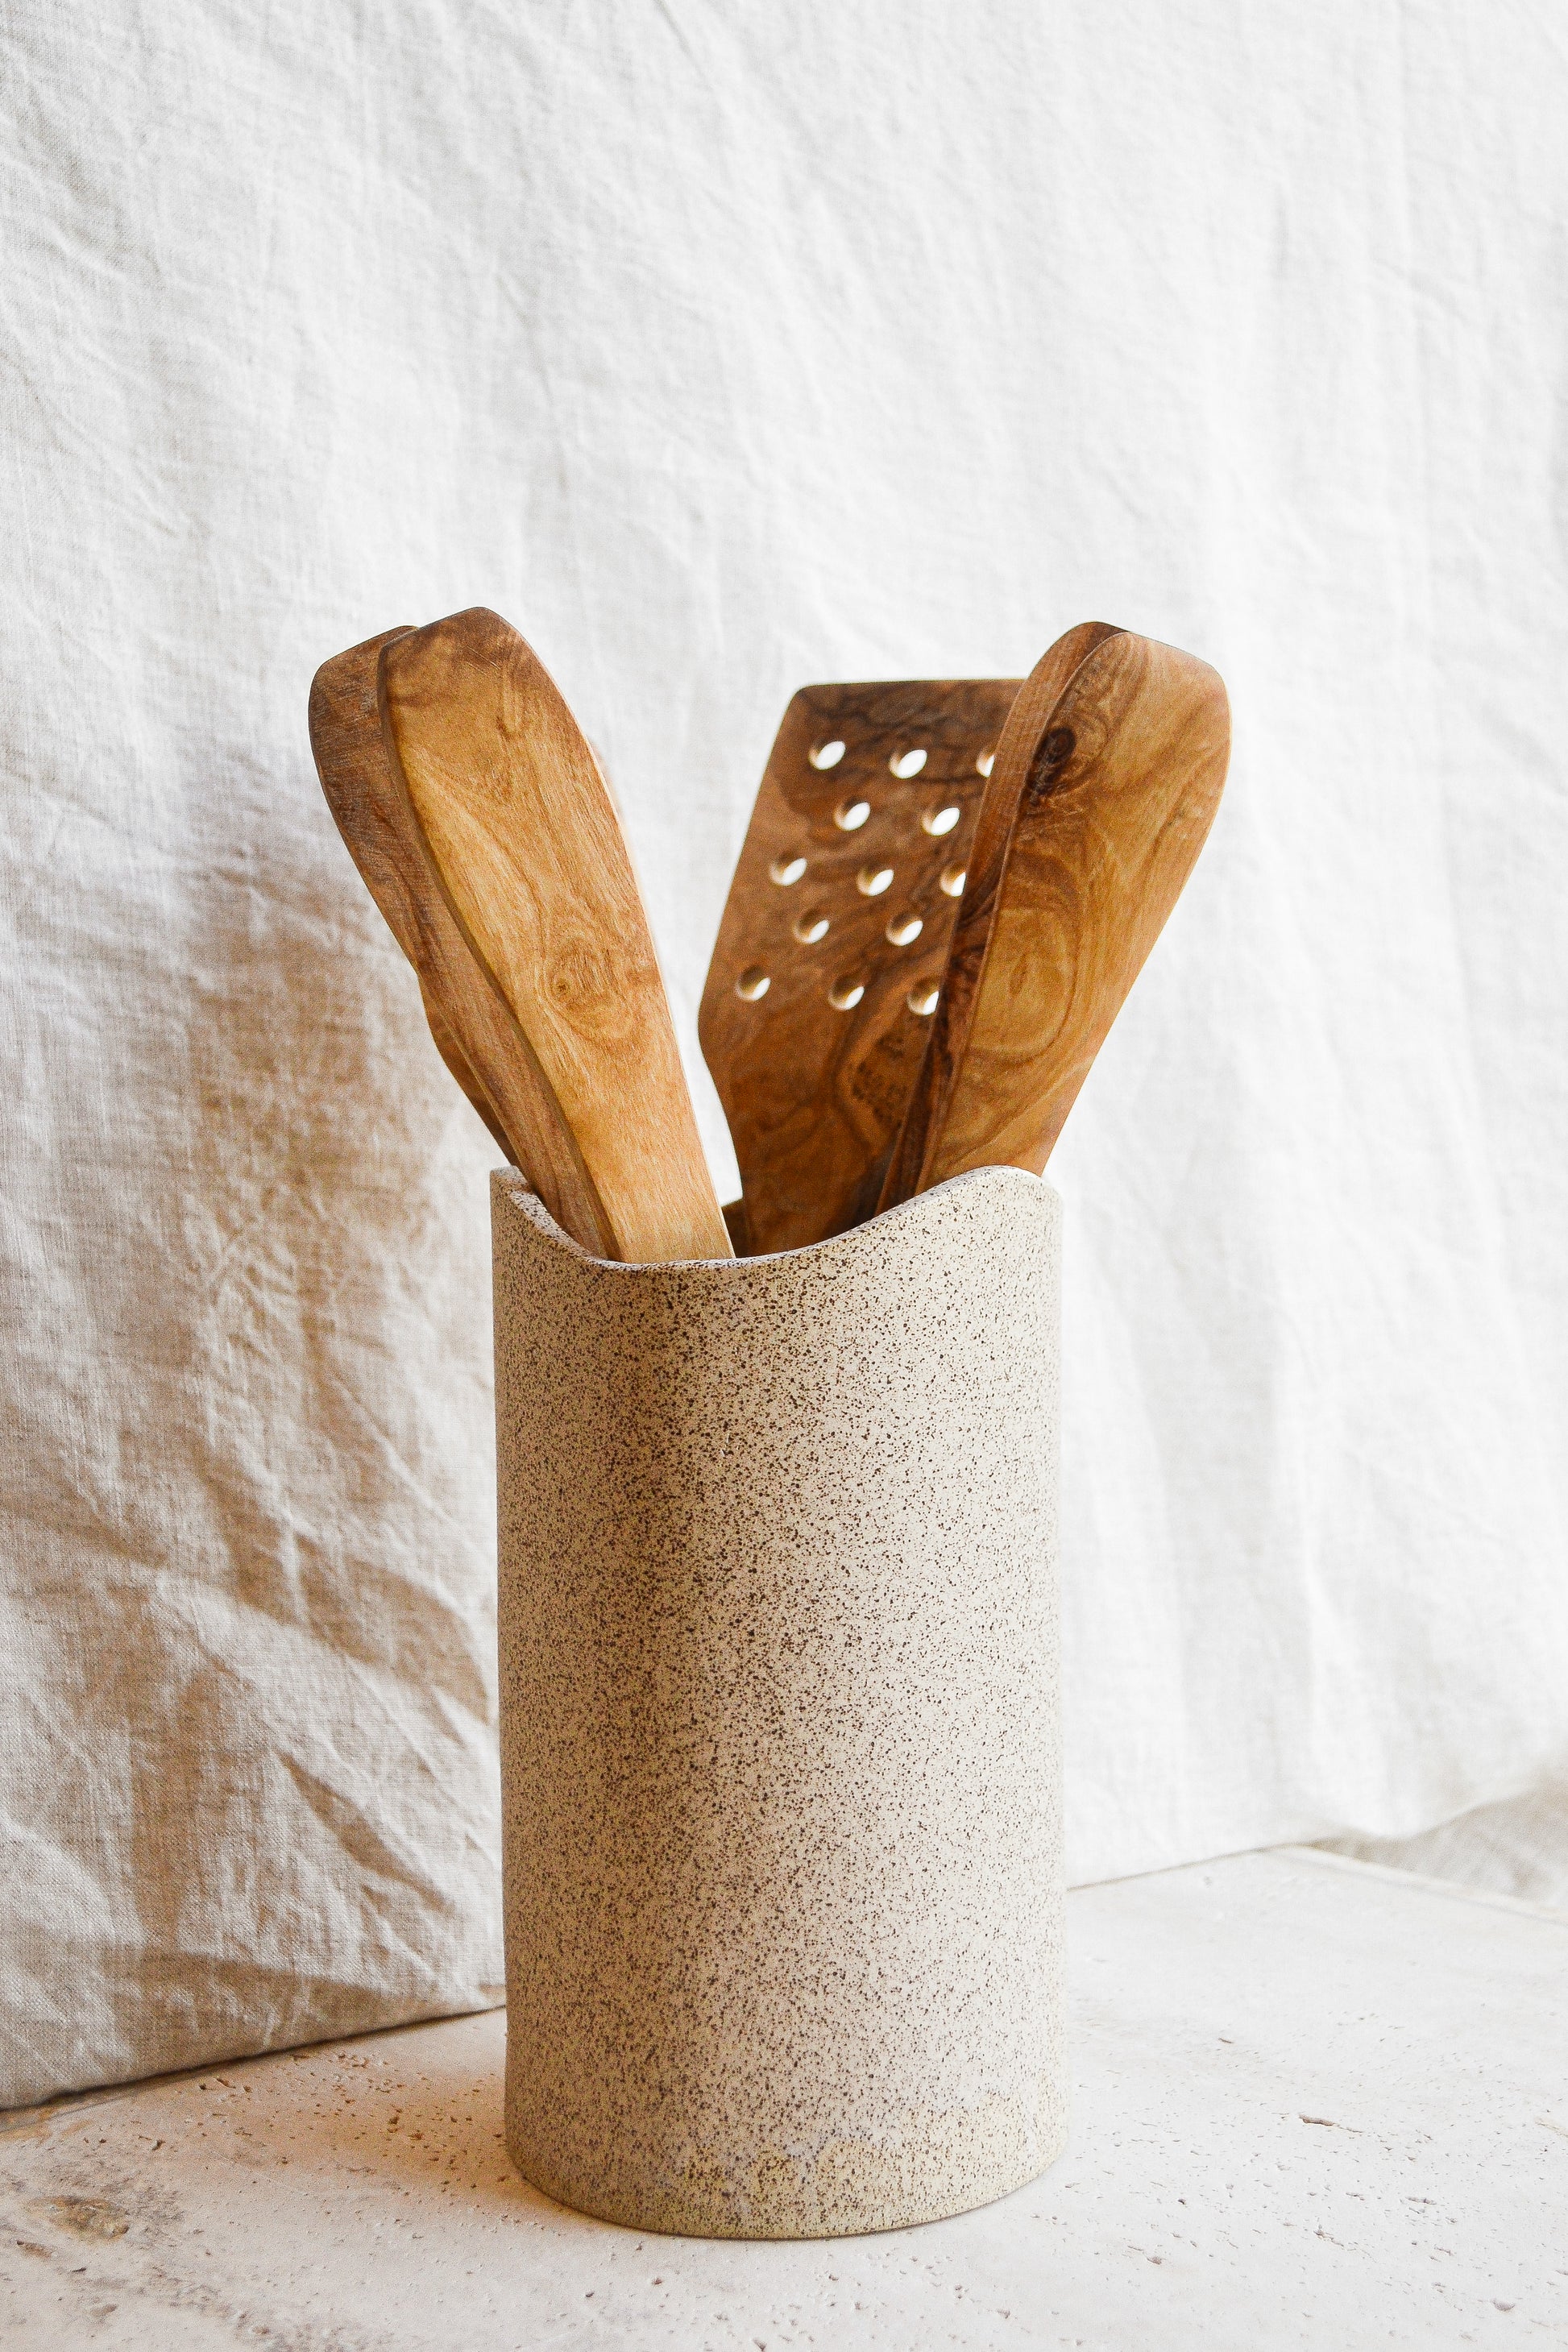 The Swell Utensil Holder makes itself at home in any and every kitchen. Designed to match the countertop and backsplash of your choice, the Swell is the ideal place for your favorite utensils. Handmade in Brooklyn, NY.